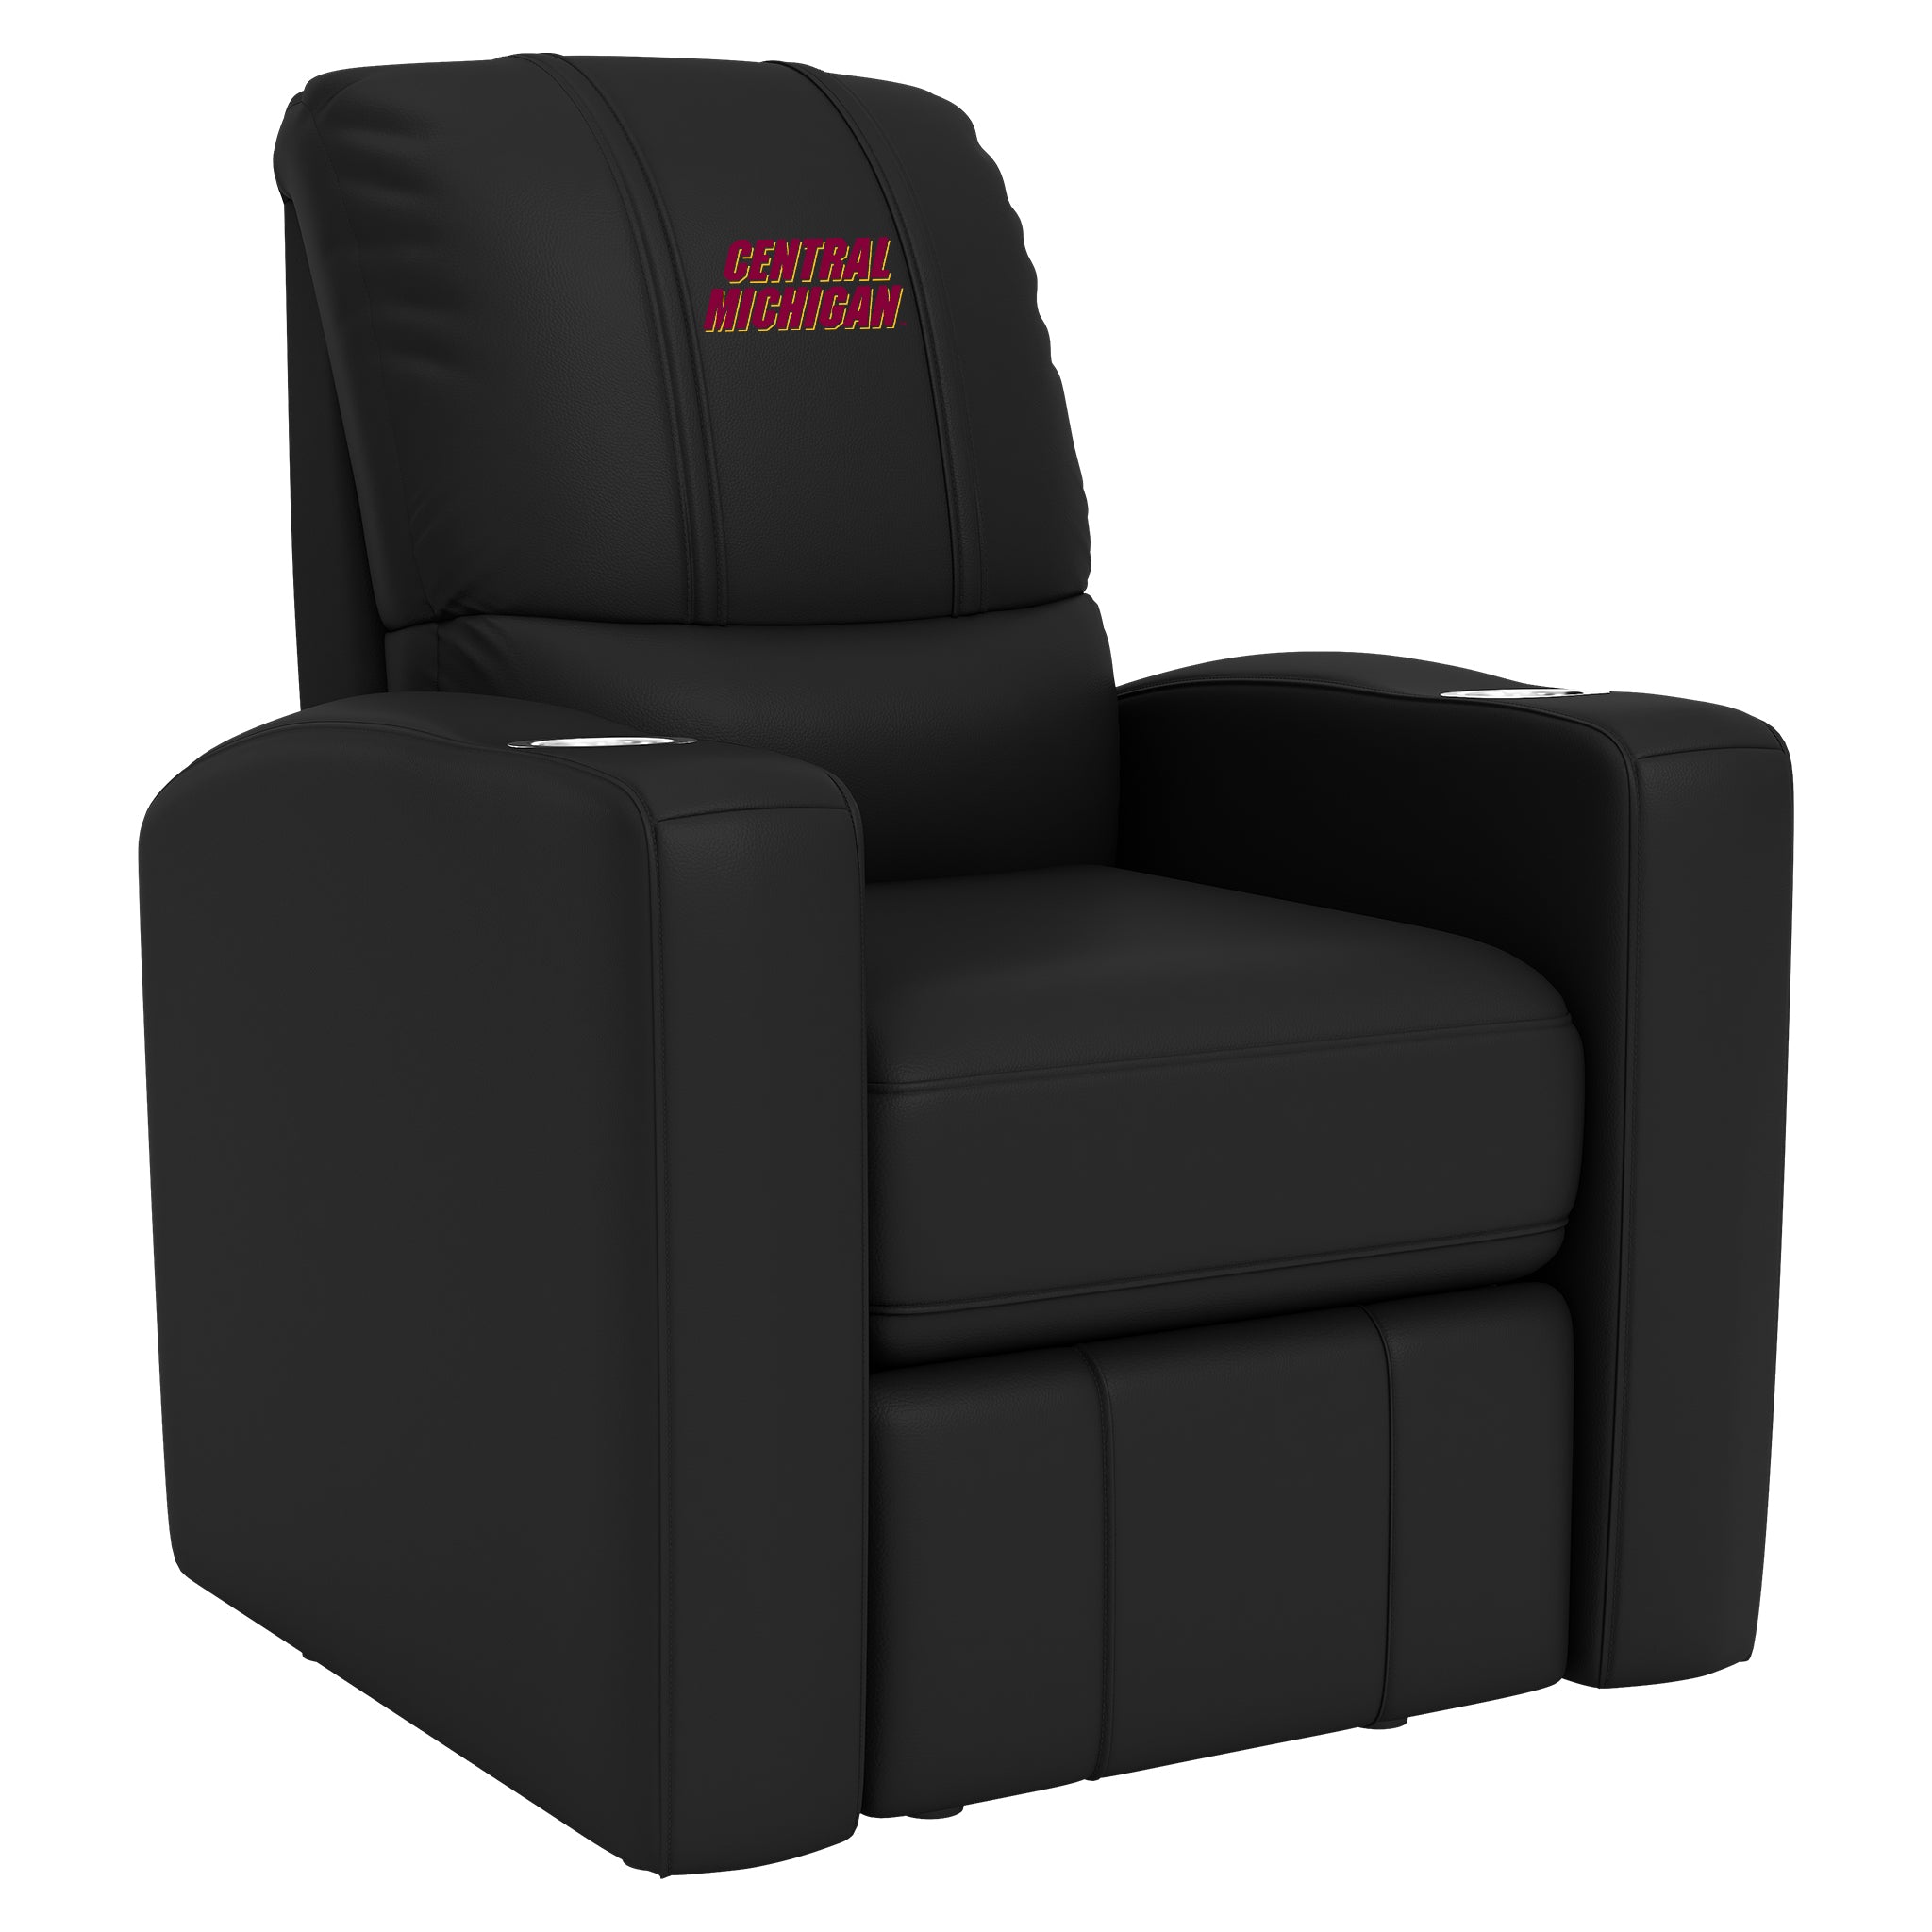 Central Michigan Stealth Recliner with Central Michigan Secondary